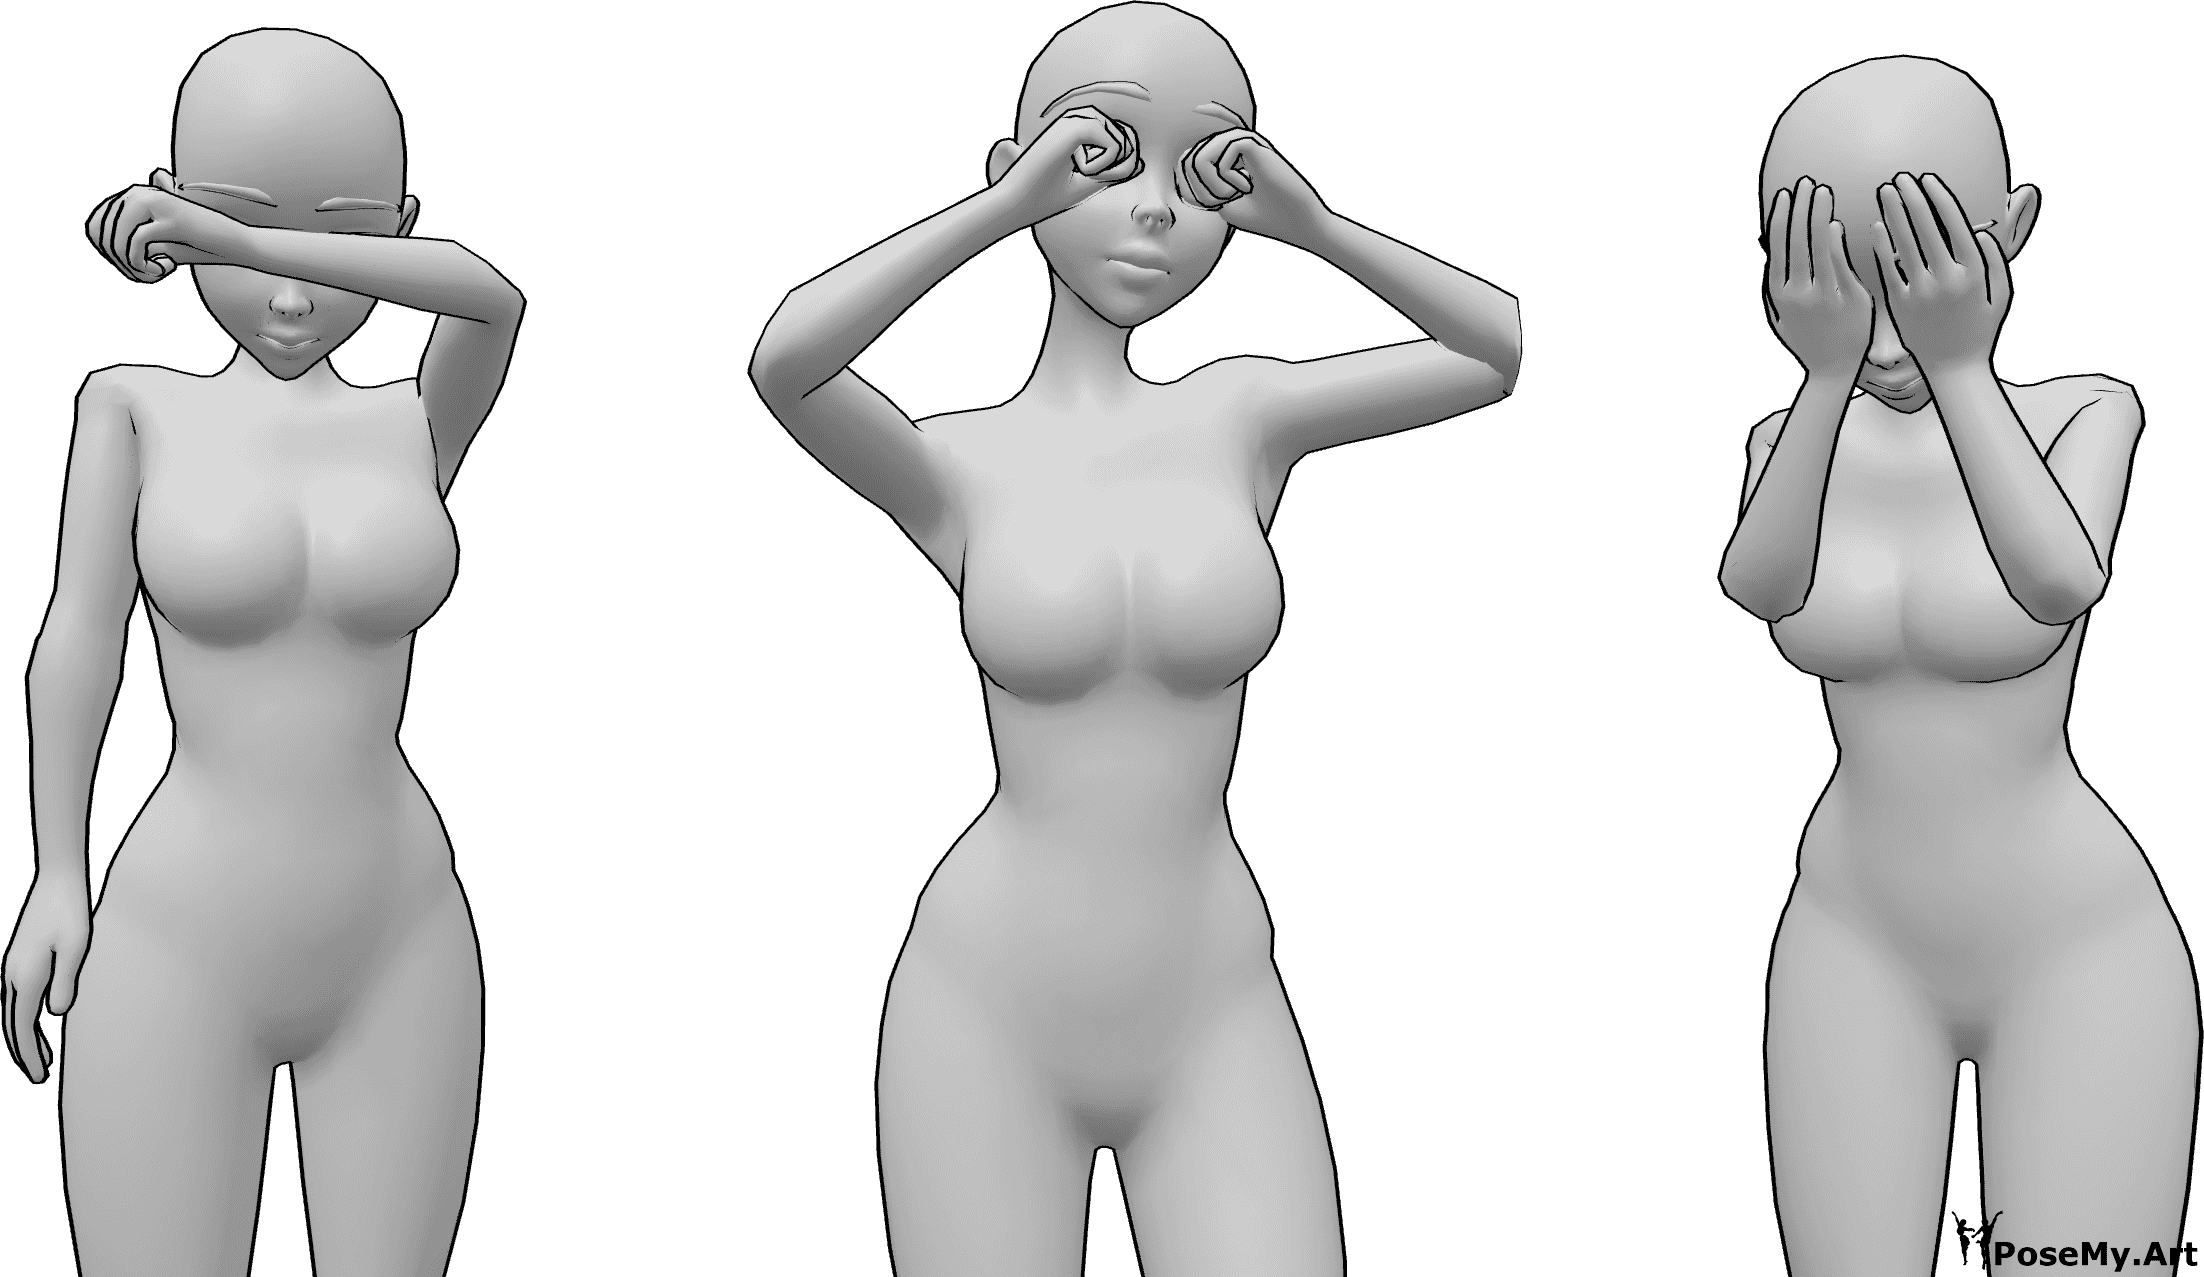 Pose Reference - Three women crying - Three anime women crying in 3 different positions. All standing. 